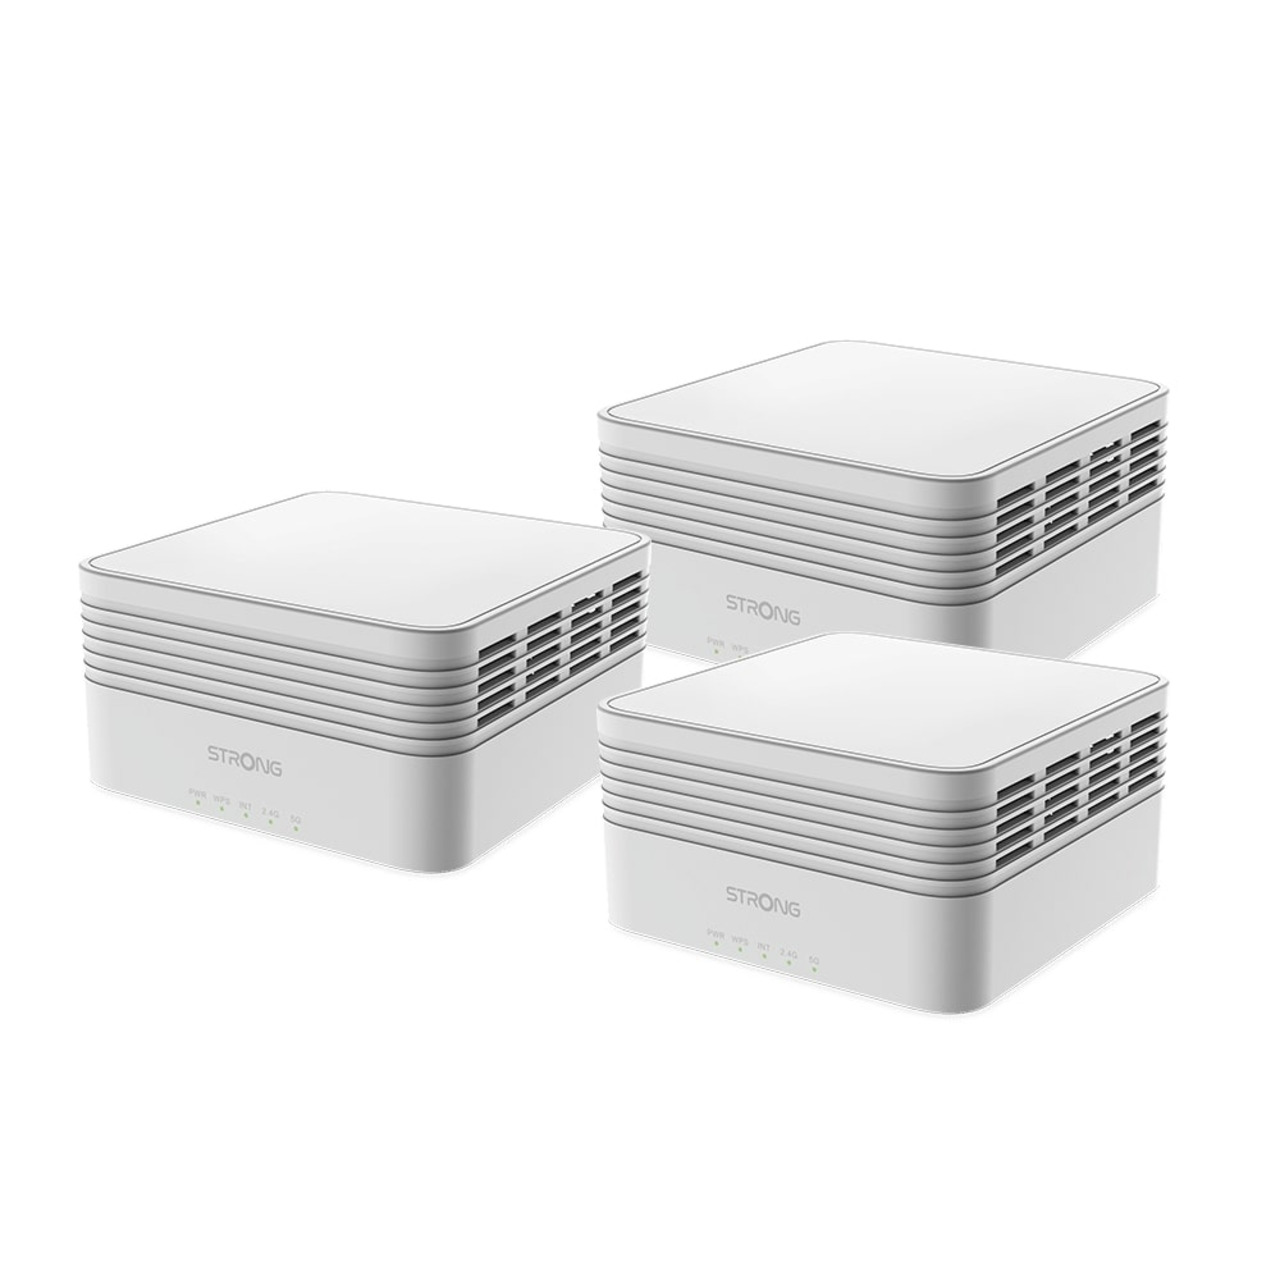 Strong 3er-WiFi-Mesh-Repeater-Kit AX3000- WiFi 6- max- 3000 Mbit-s- MU-MIMO- bis zu 1050 m- unter PC-Hardware